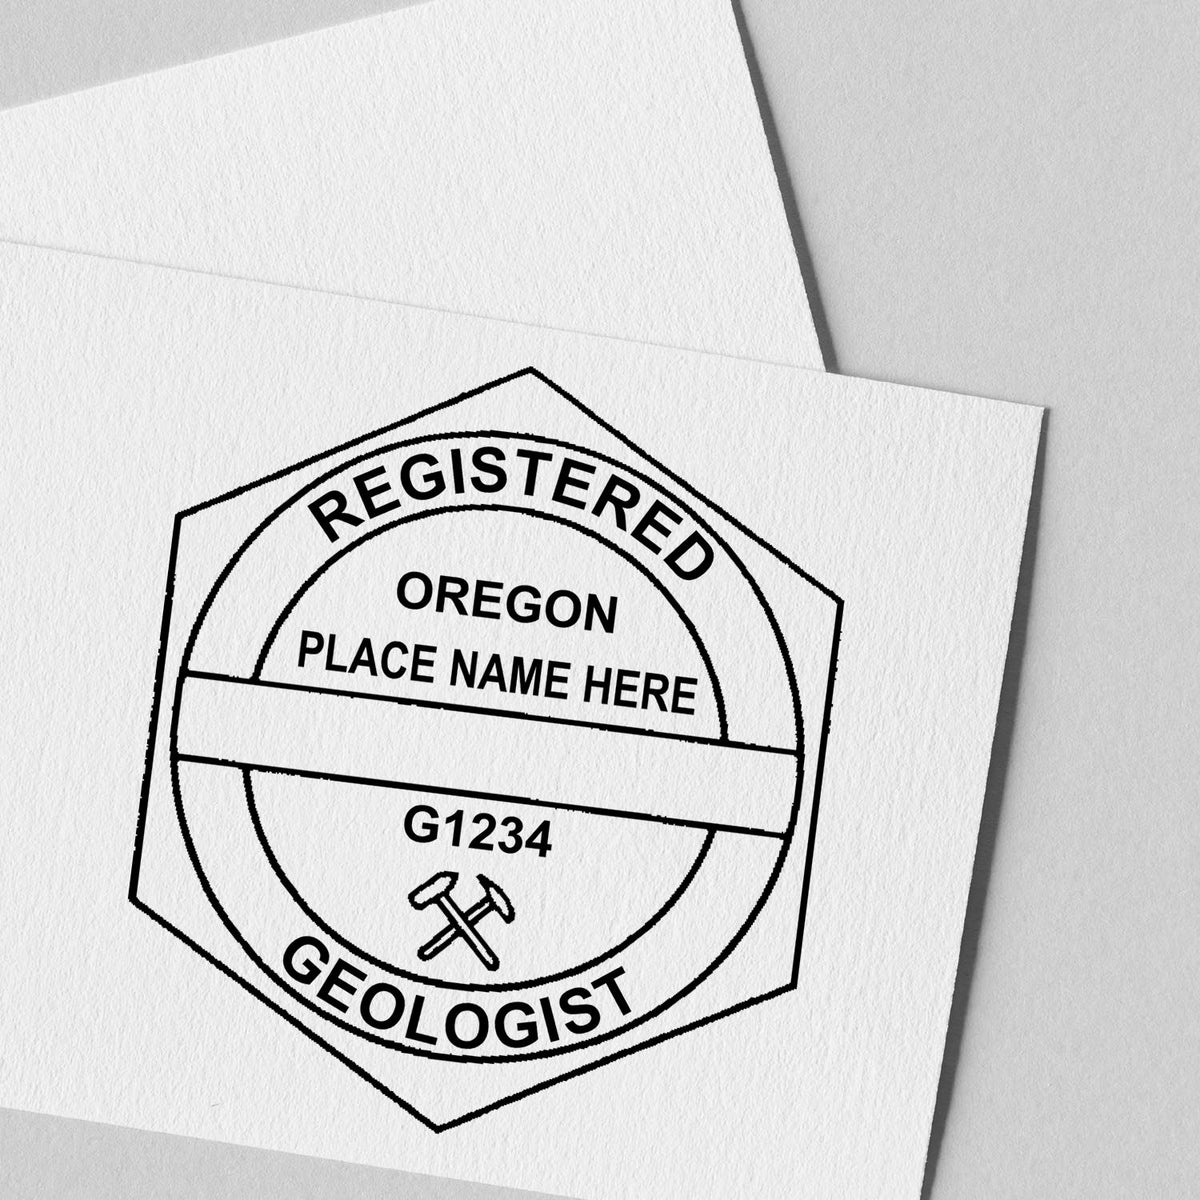 The Oregon Professional Geologist Seal Stamp stamp impression comes to life with a crisp, detailed image stamped on paper - showcasing true professional quality.